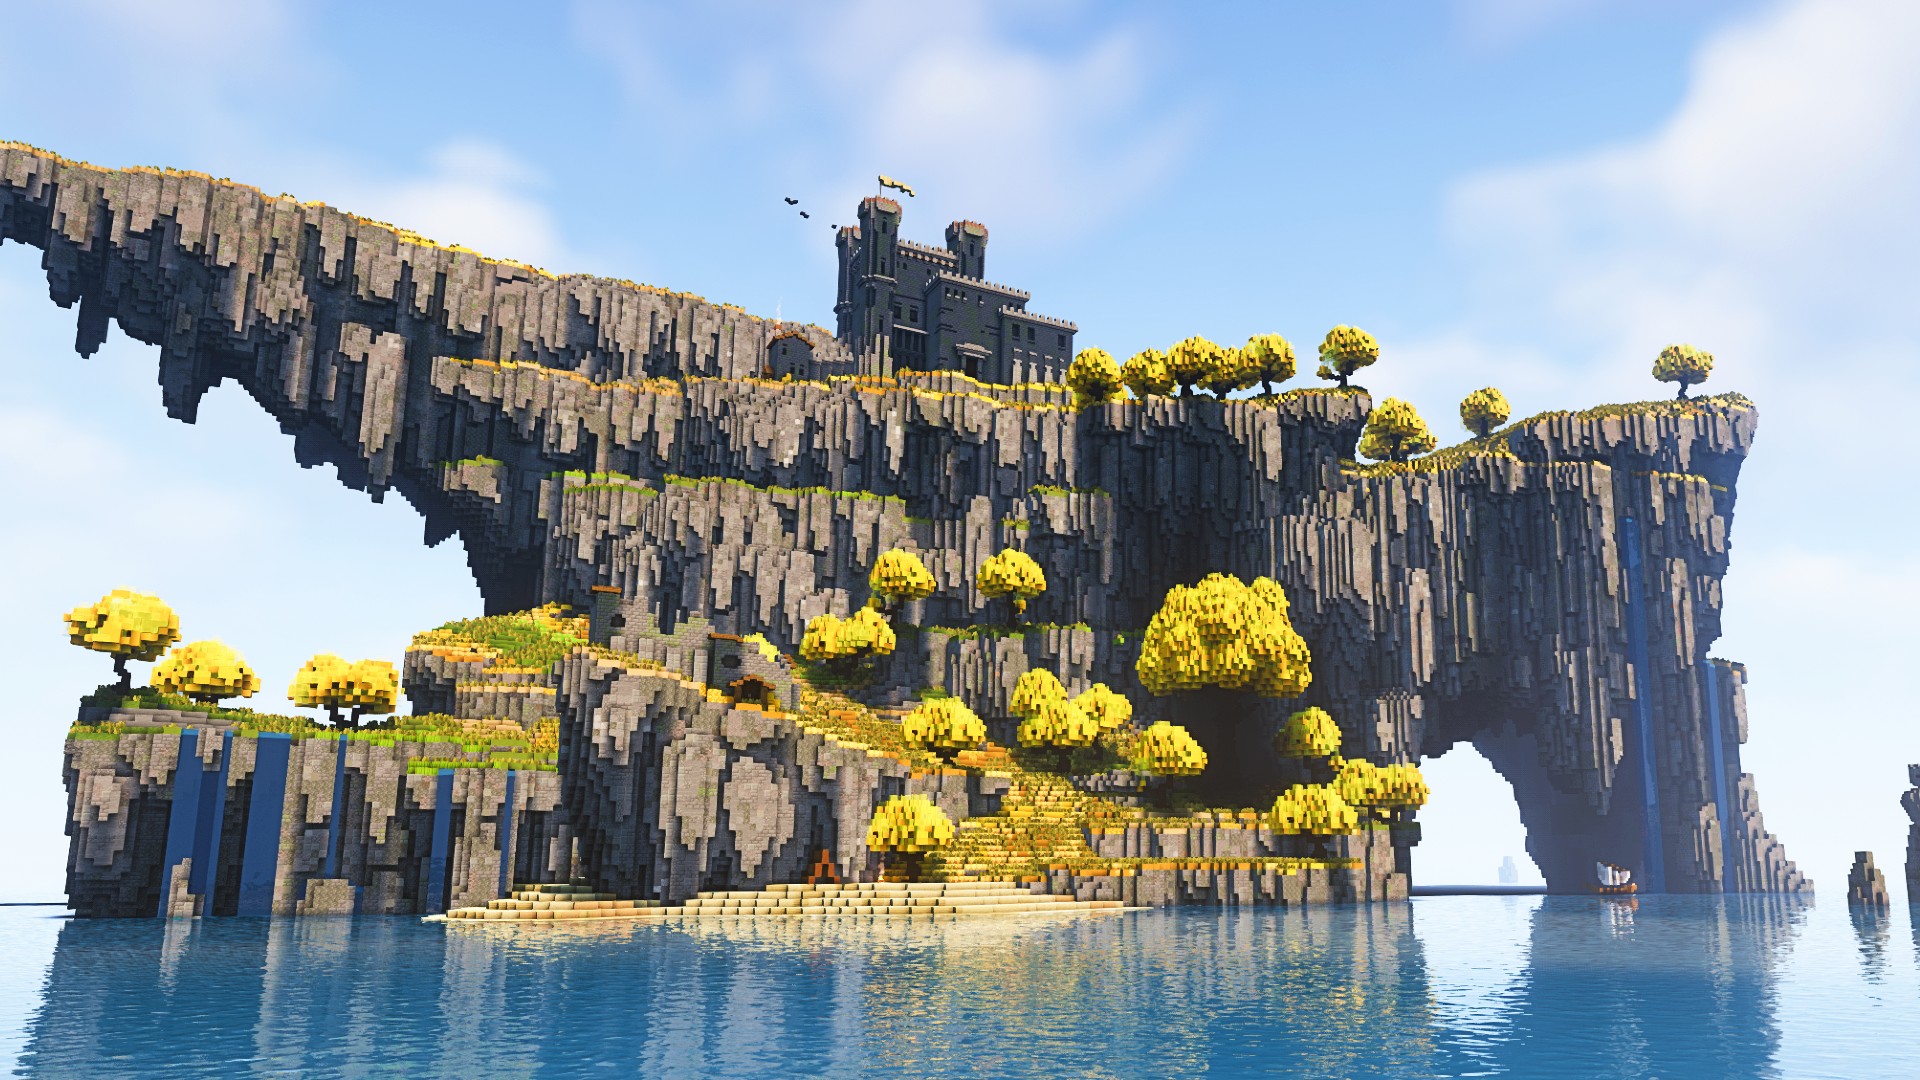 This Elden Ring-inspired Minecraft build looks incredible